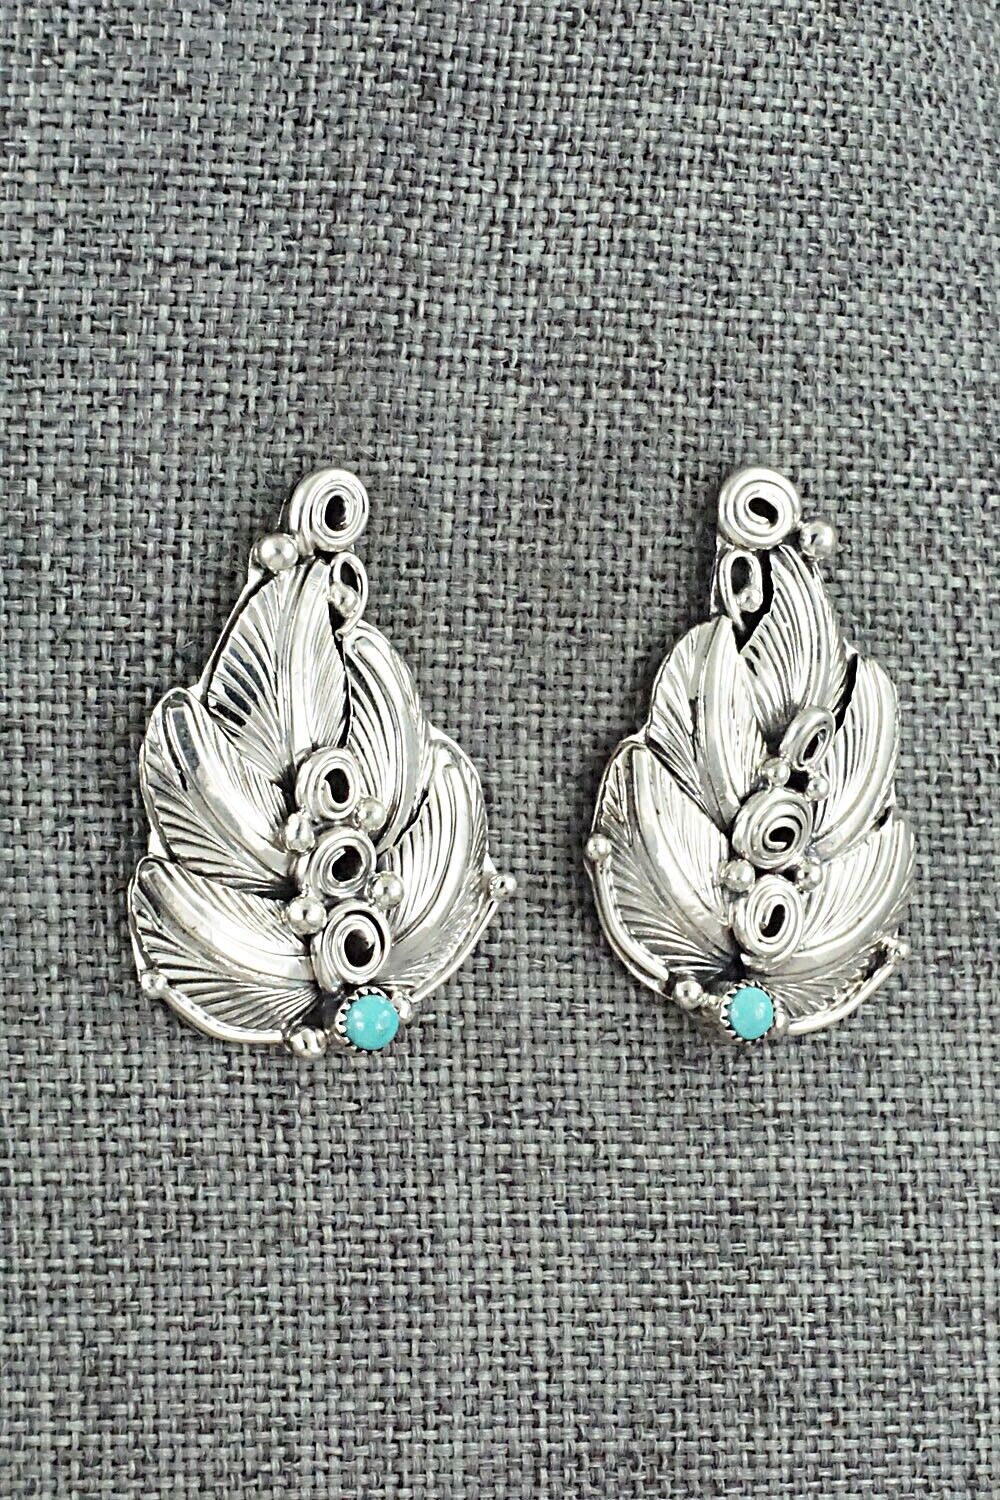 Turquoise & Sterling Silver Earrings - Darrell Morgan